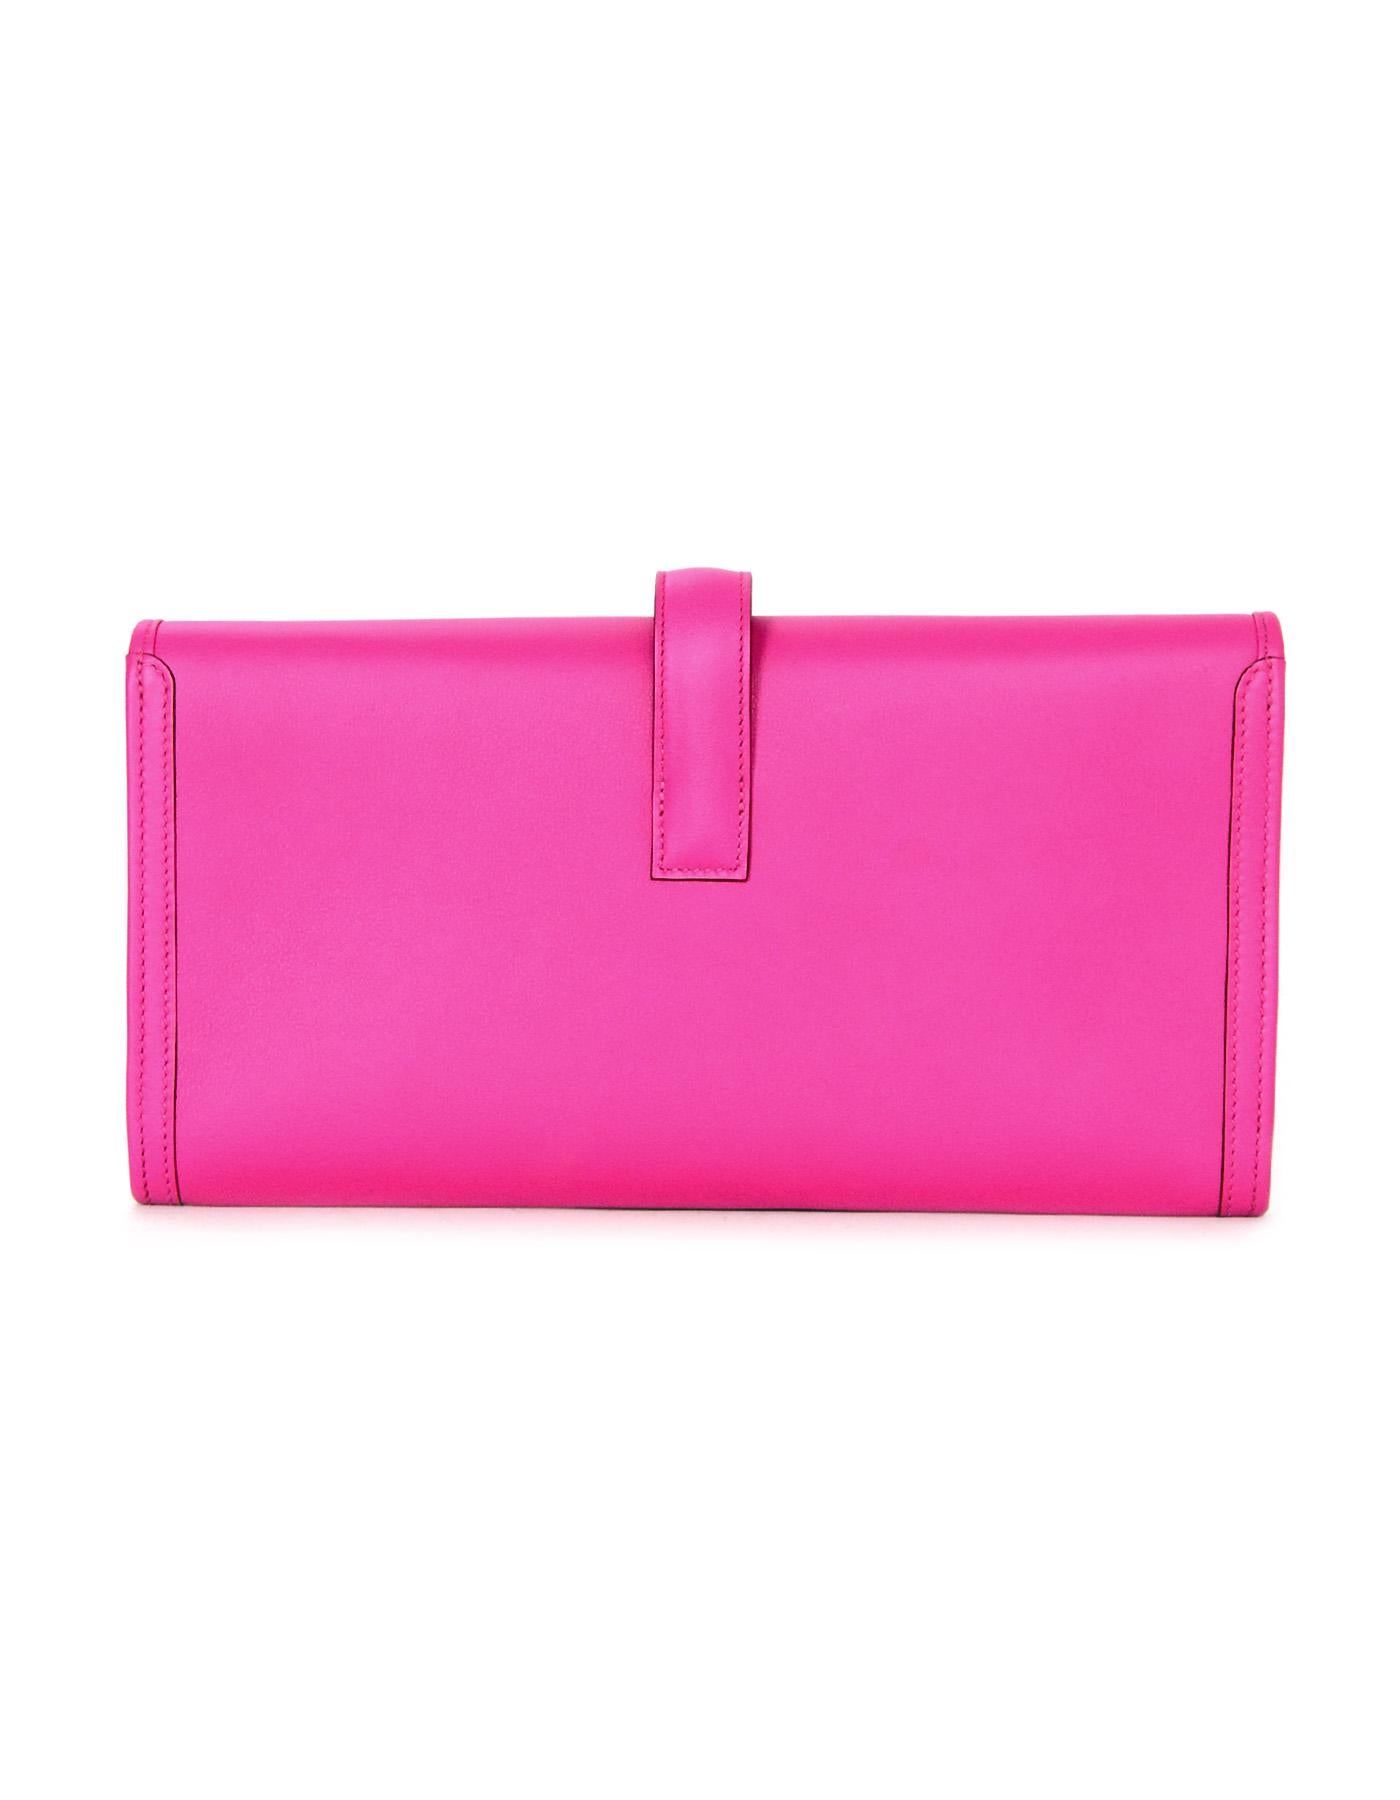 Hermes Magnolia Swift Leather Jige Elan 29 Clutch

Made In: France
Year of Production: 2018
Color: Magnolia pink
Hardware: None
Materials: Swift leather
Lining: Leather
Closure/opening: Flap top with strap that goes through H
Exterior Pockets: